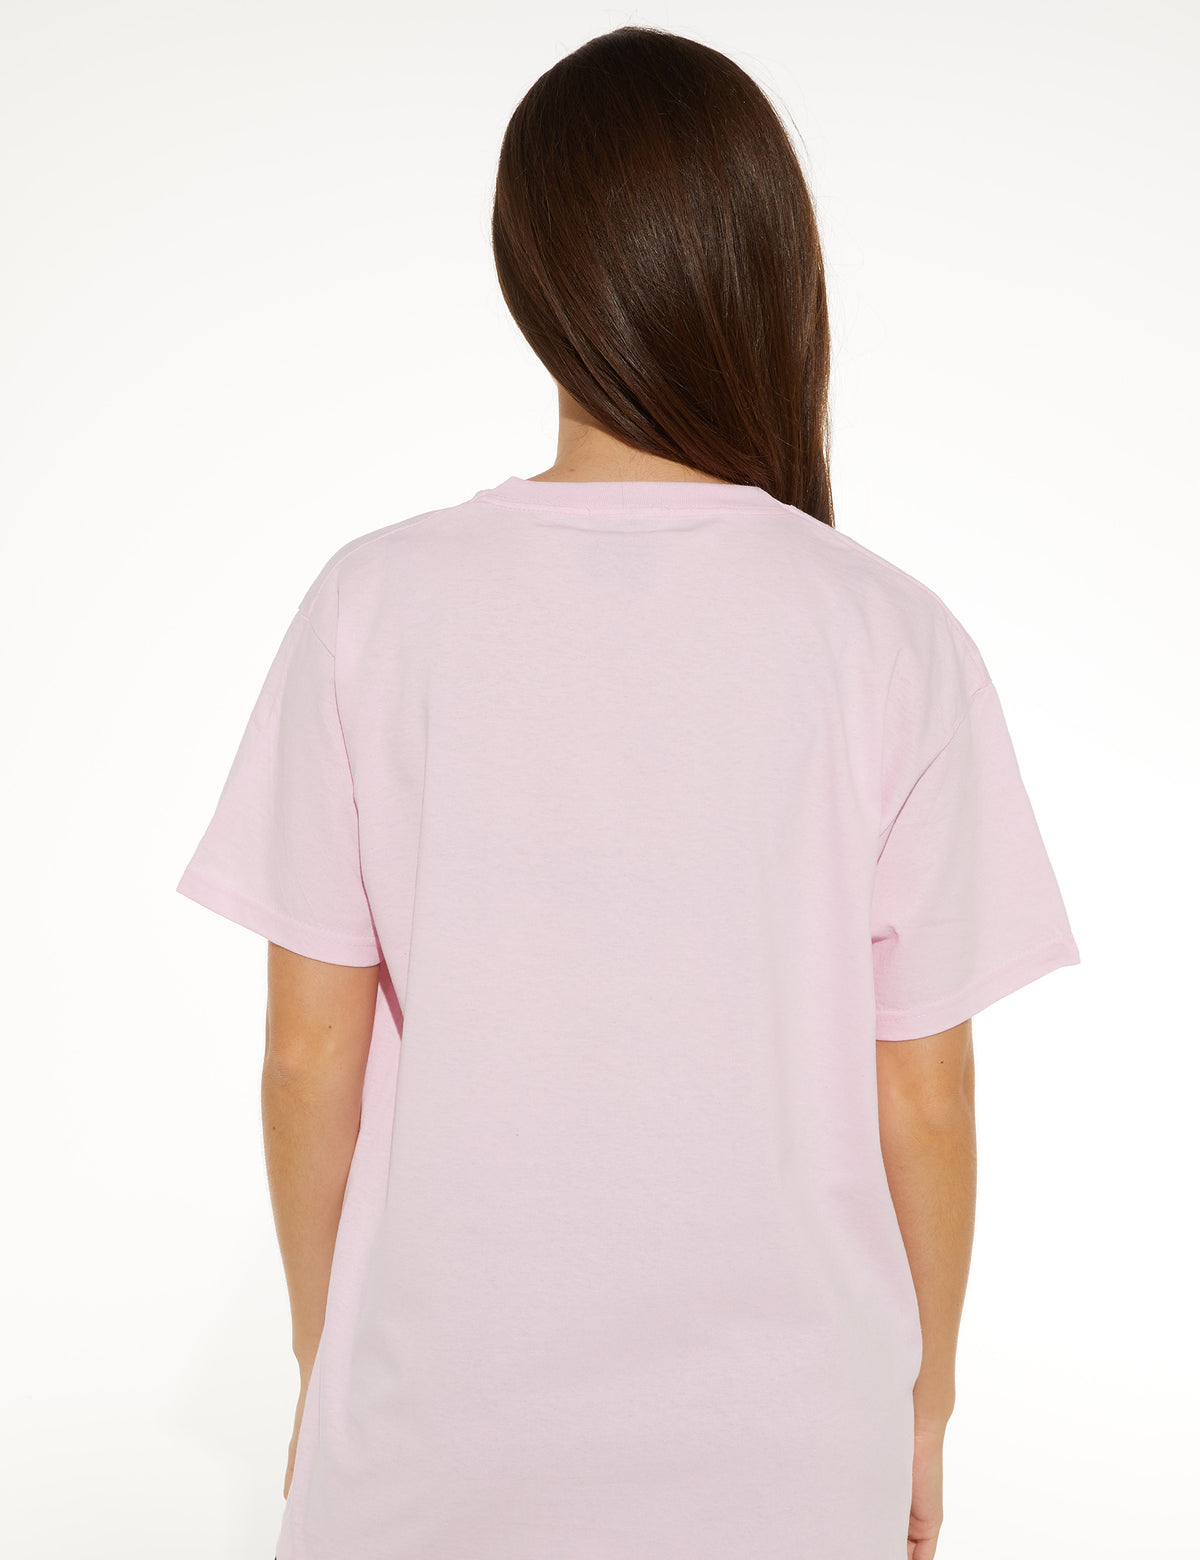 LOVE IS A DREAM PINK TEE